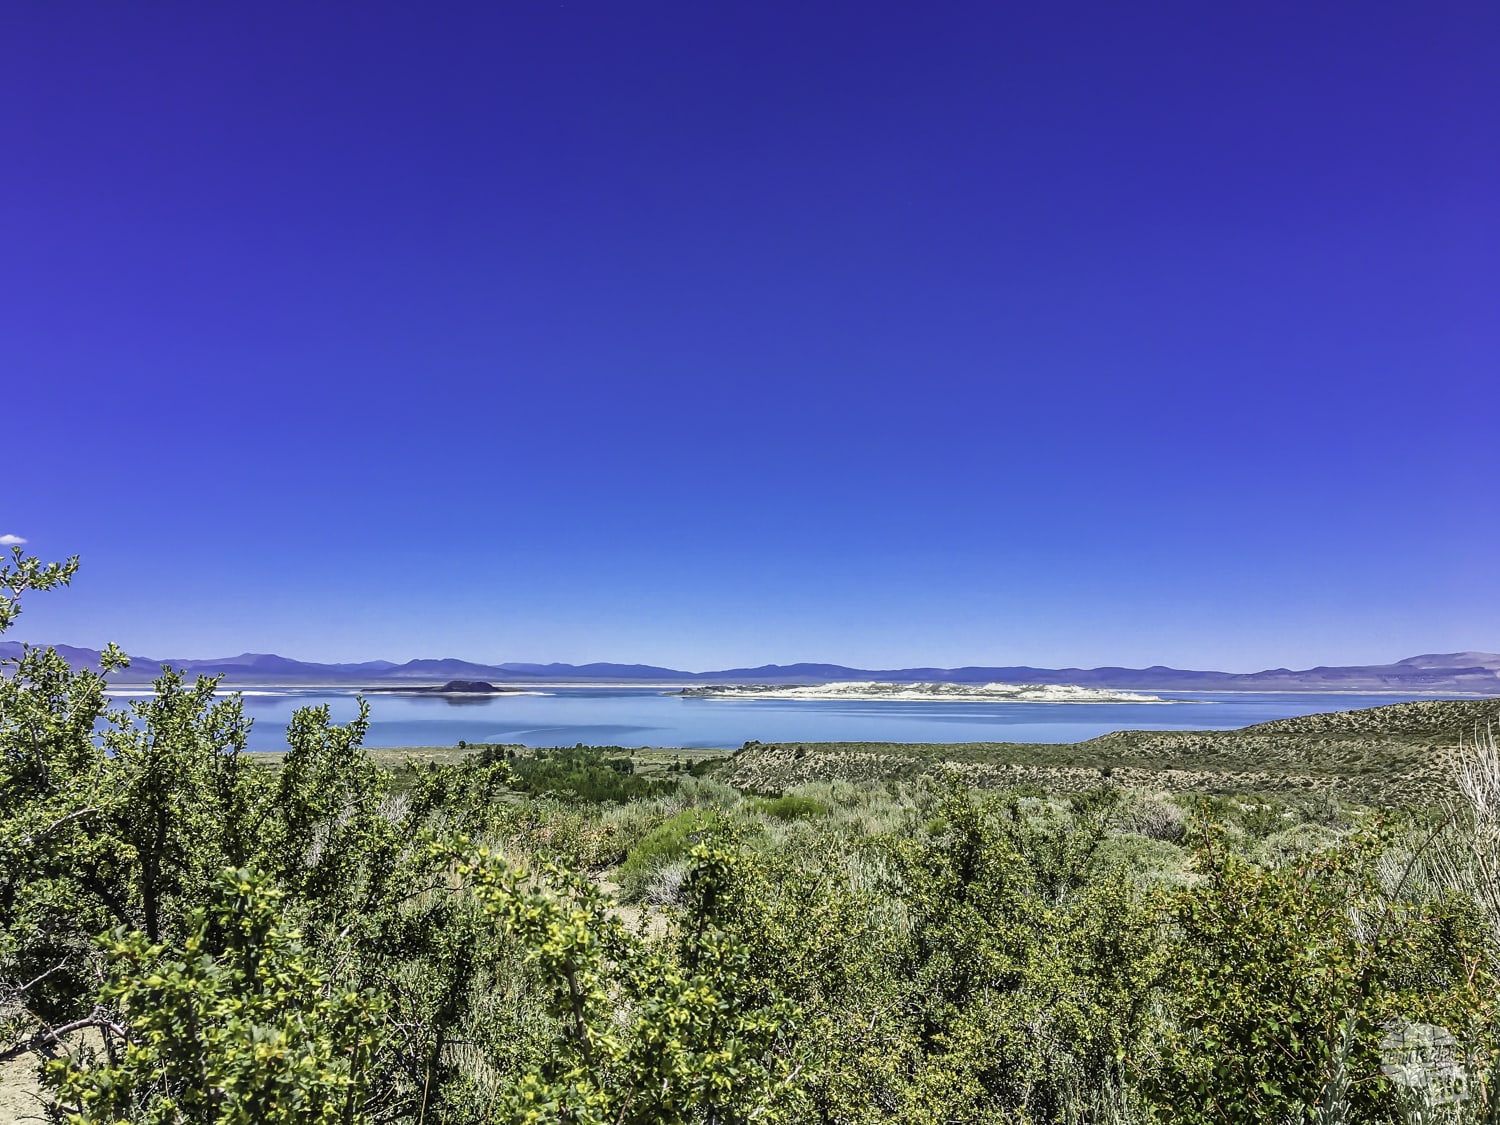 Saltwater Mono Lake is the highlight of Lee Vining, CA.